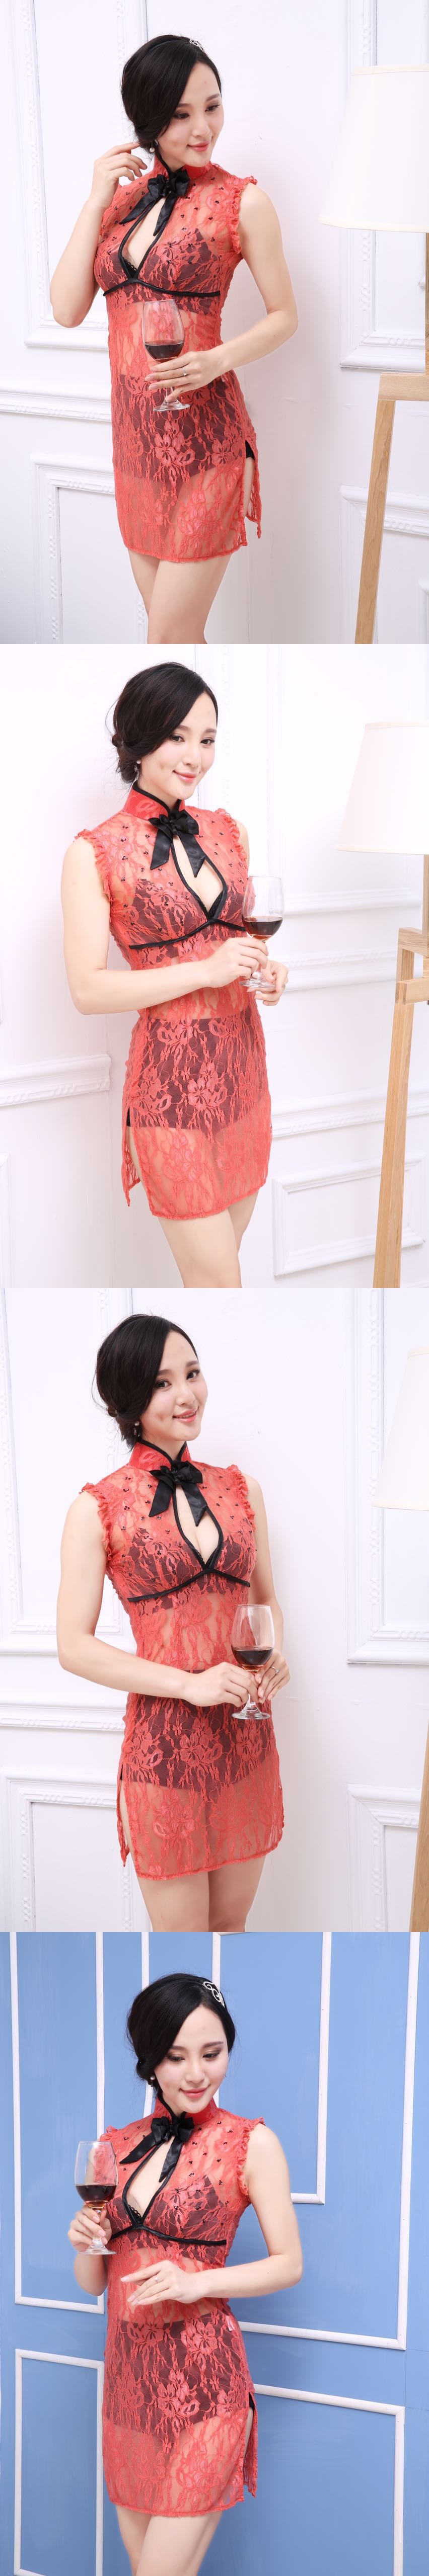 adult loving｜See Thru Lace Qibao with Black Tie